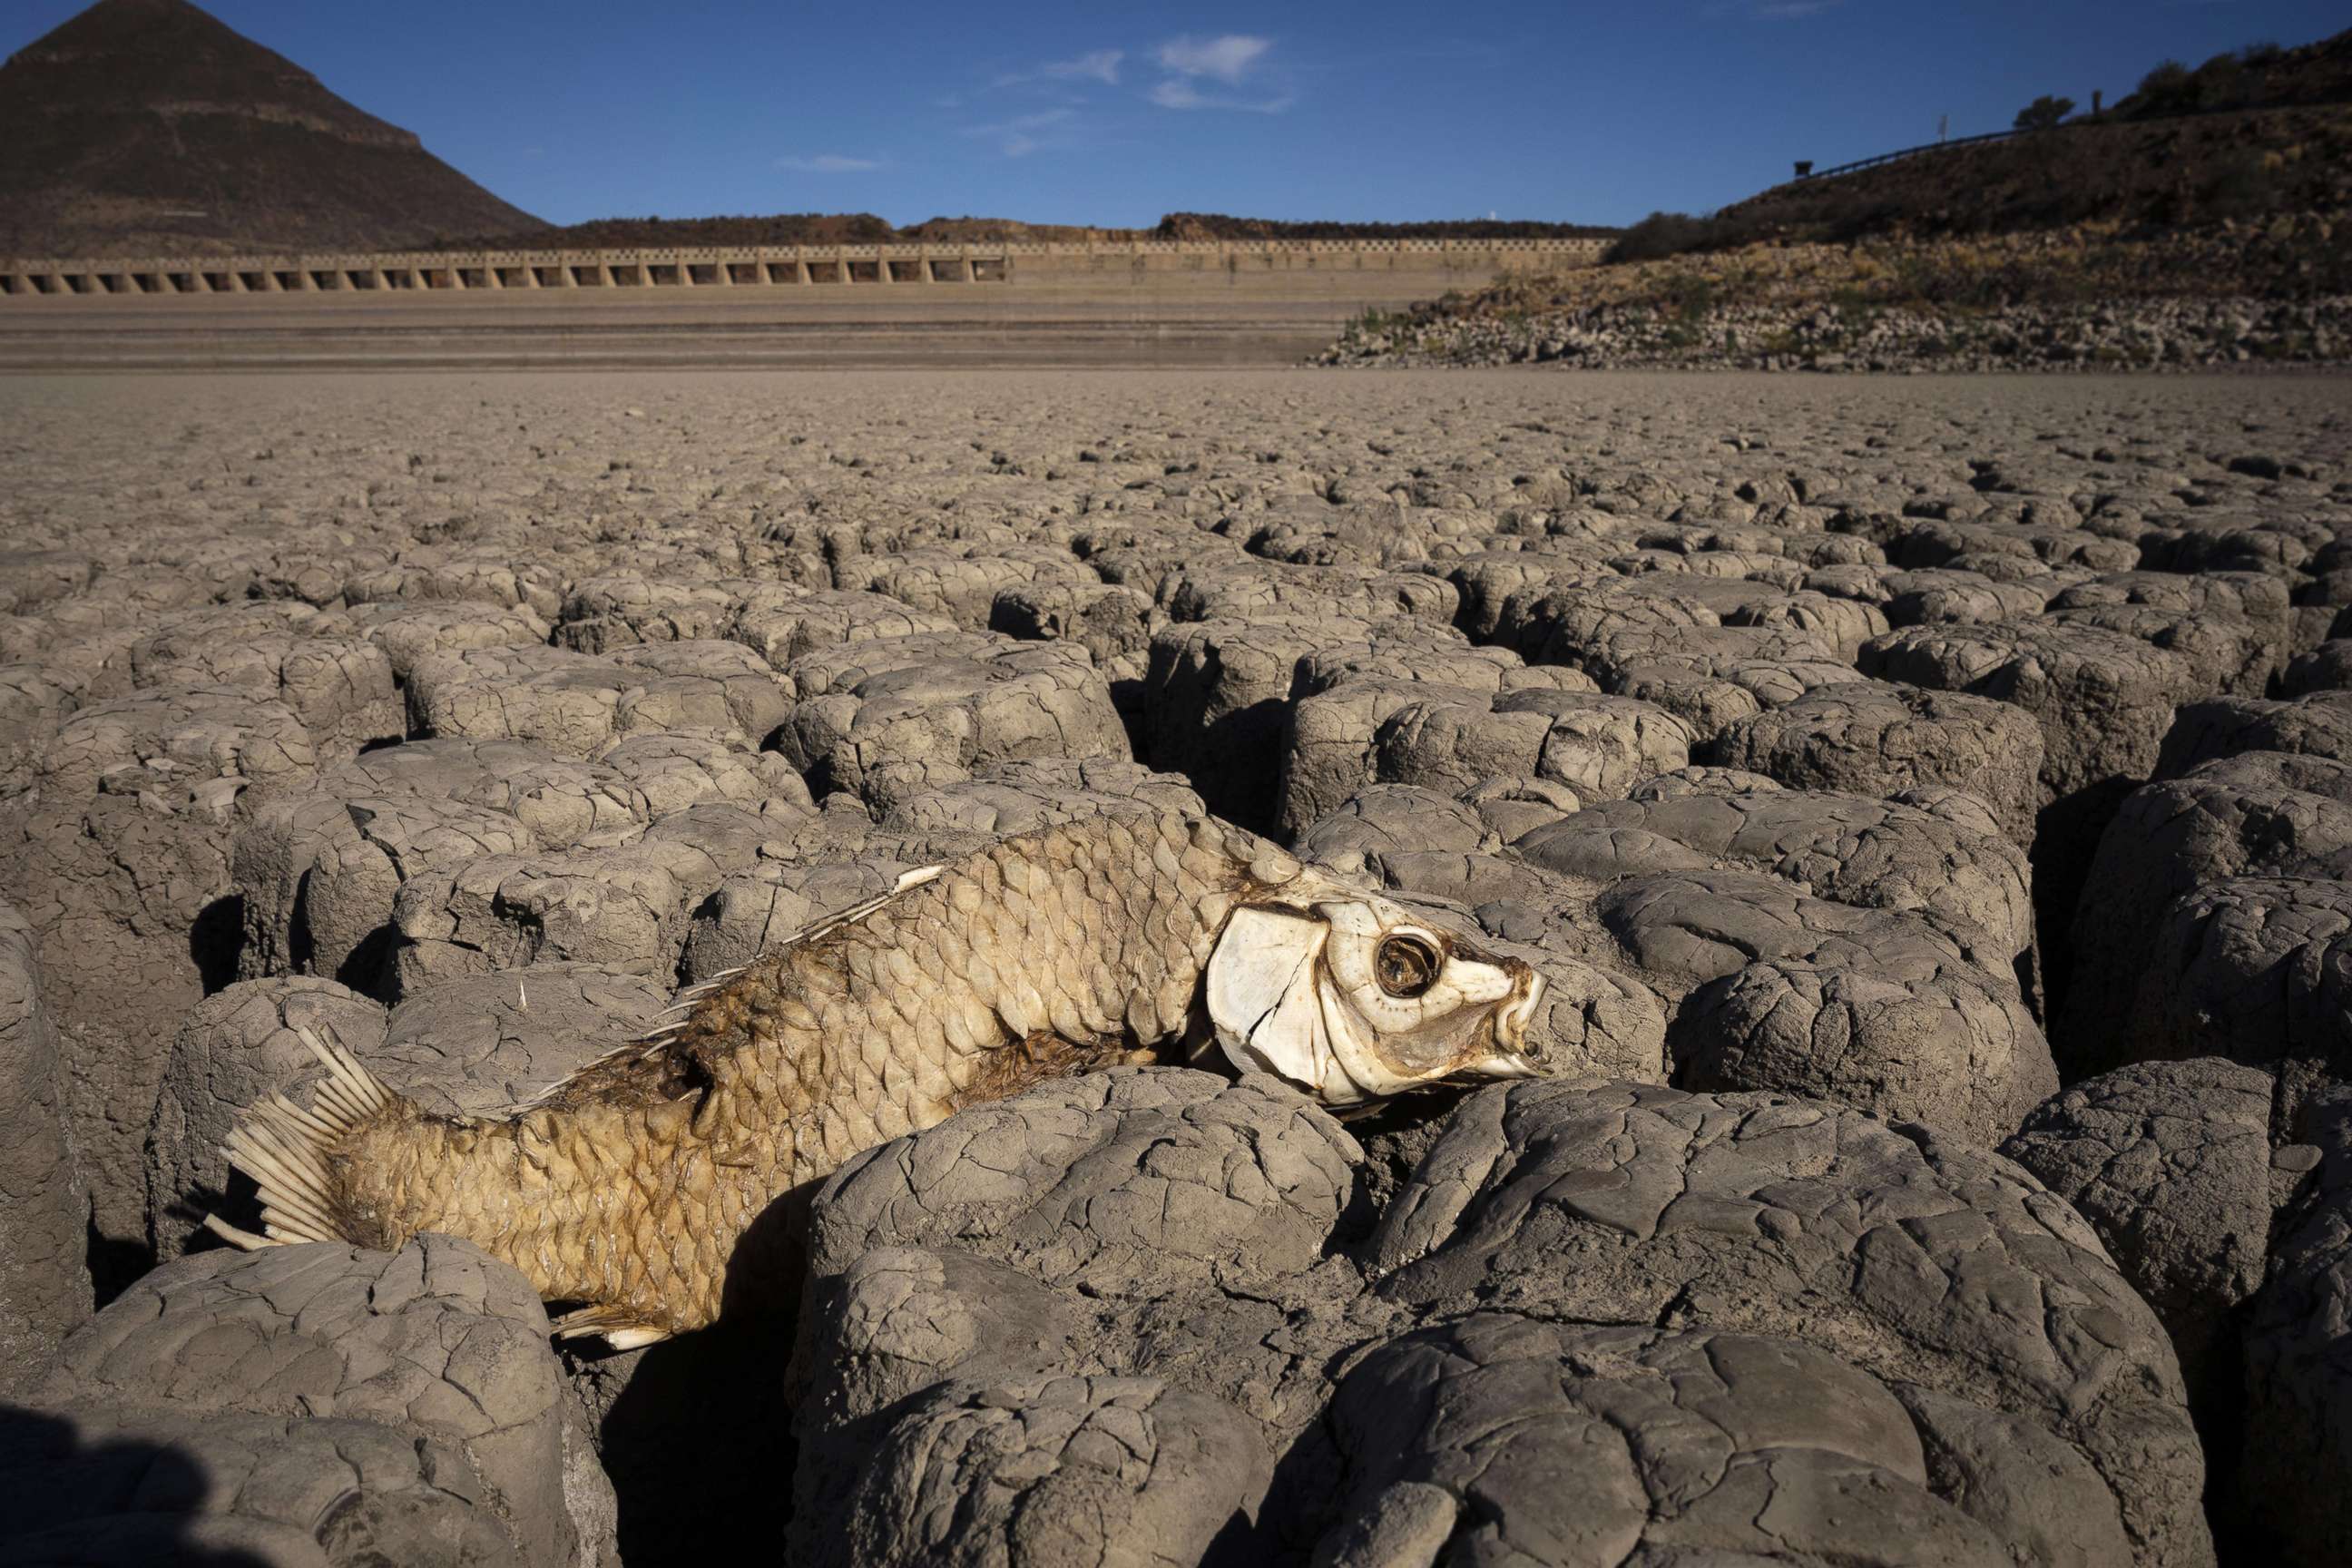 PHOTO: One of hundreds of dead fish lies in the dried-up Nqweba Dam after record drought in South Africa, Jan. 2, 2020.